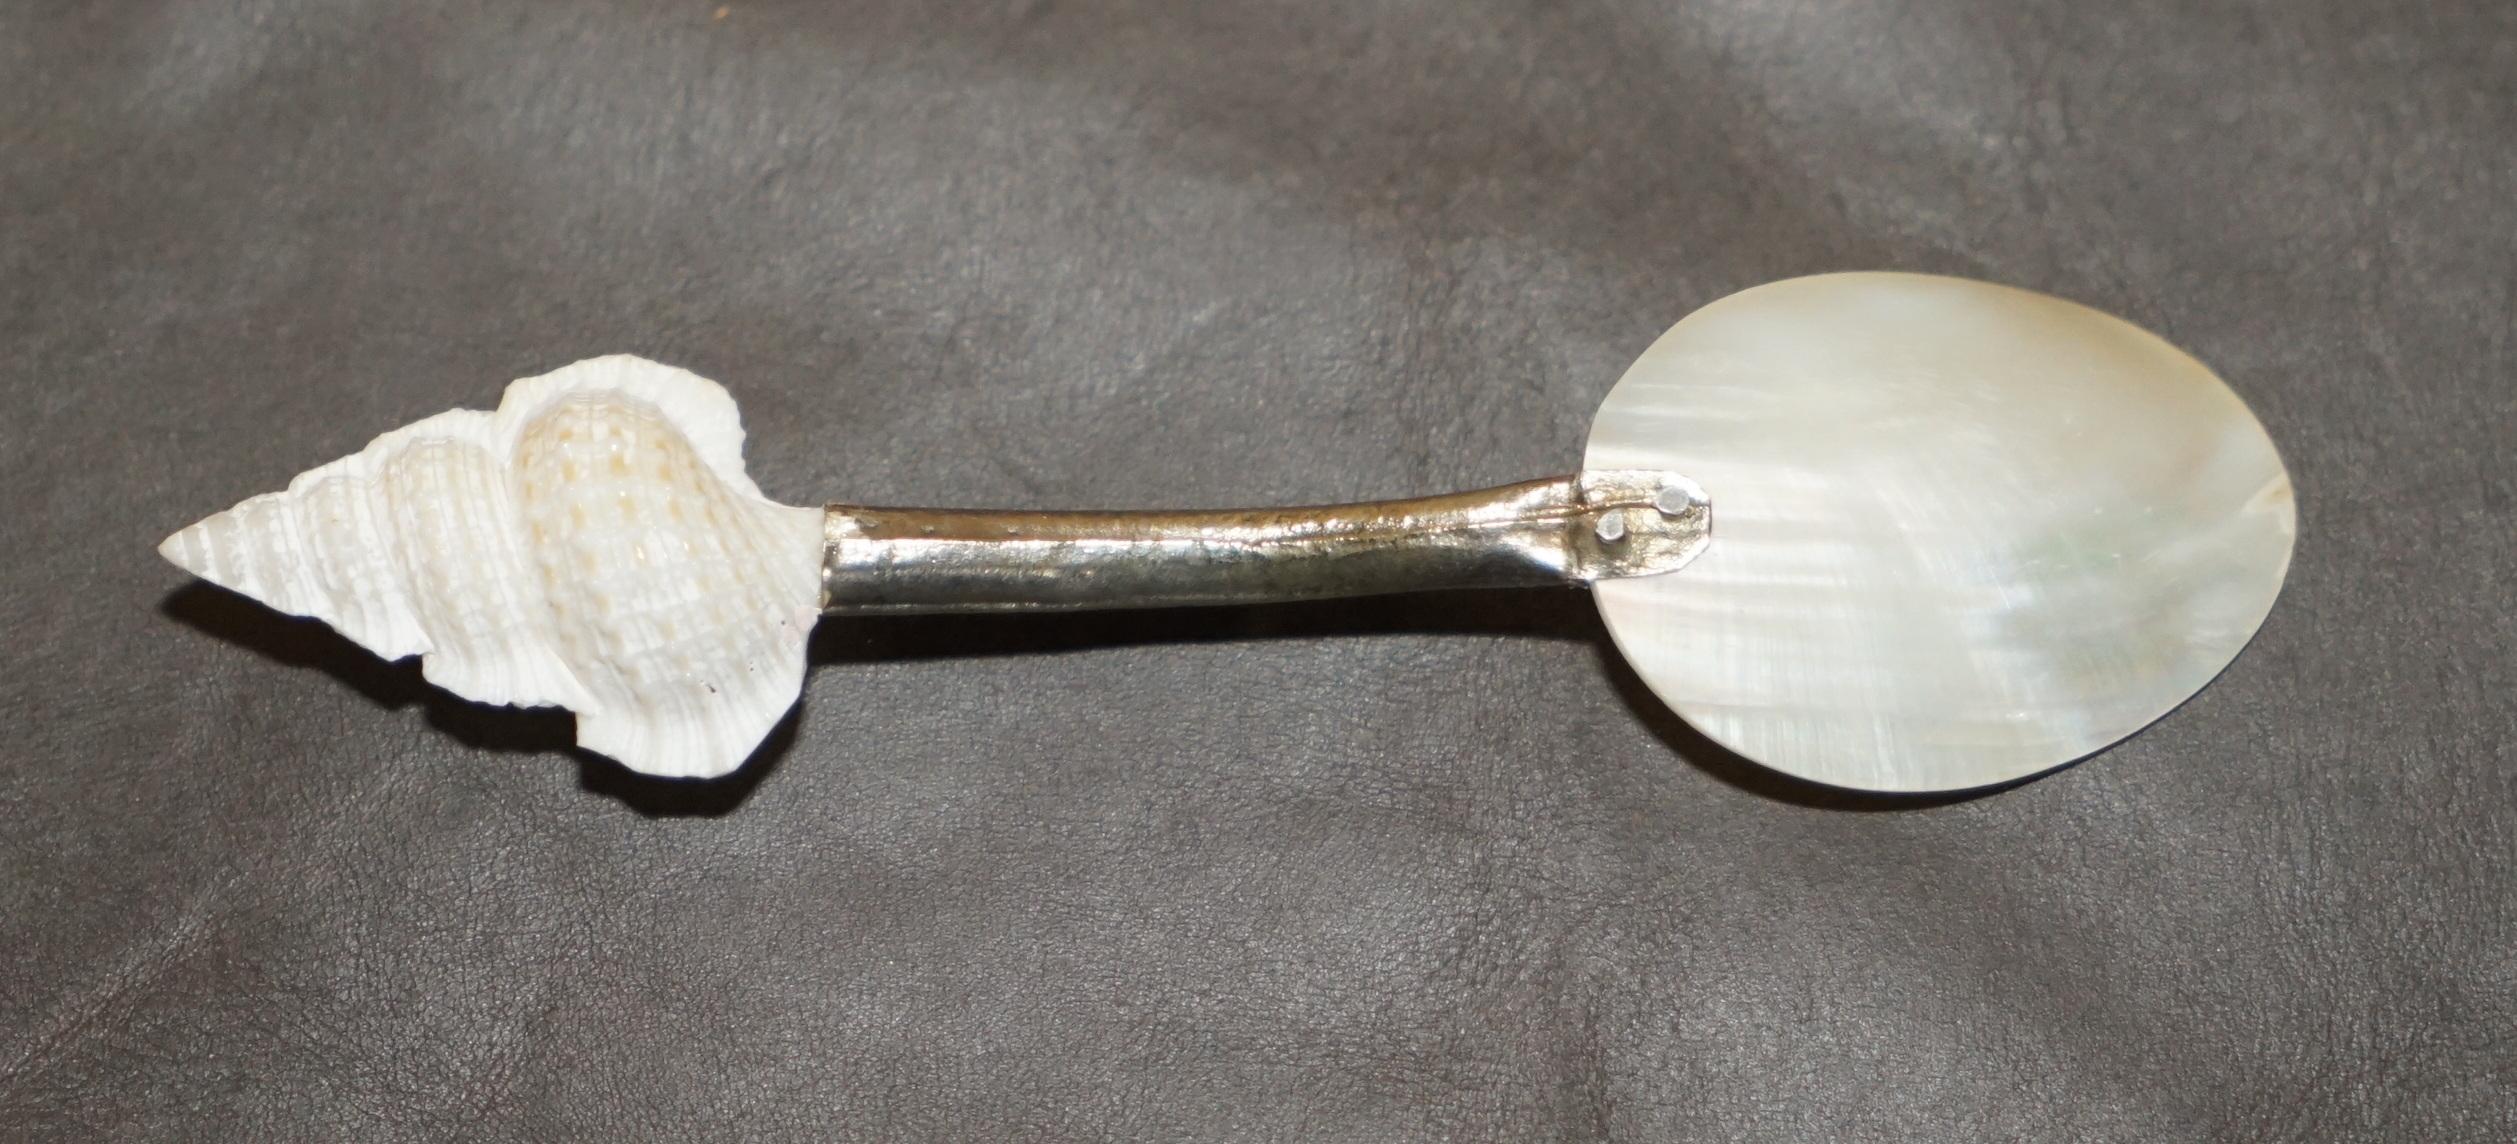 FOUR ANTIQUE ViCTORIAN MOTHER OF PEARL & STERLING SILVER TESTED SHELL TEA SPOONS For Sale 7